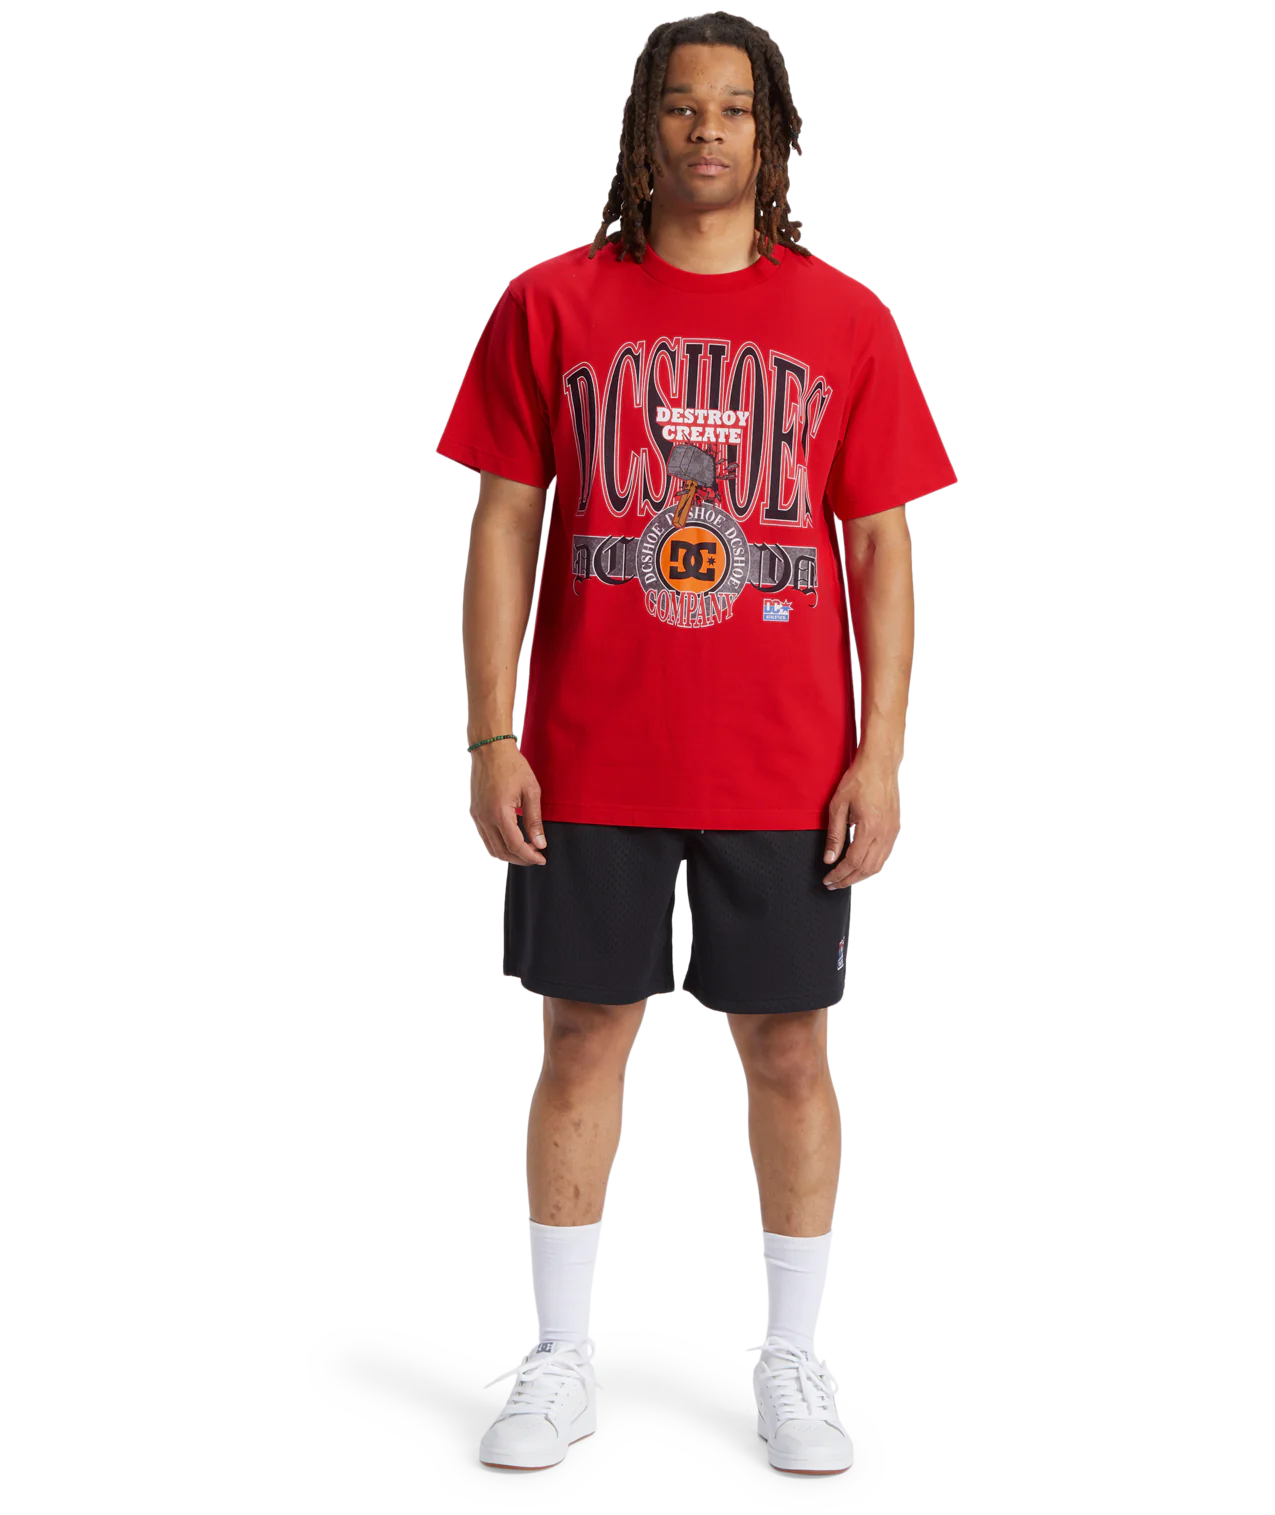 DC - SHY TOWN TEE - RED